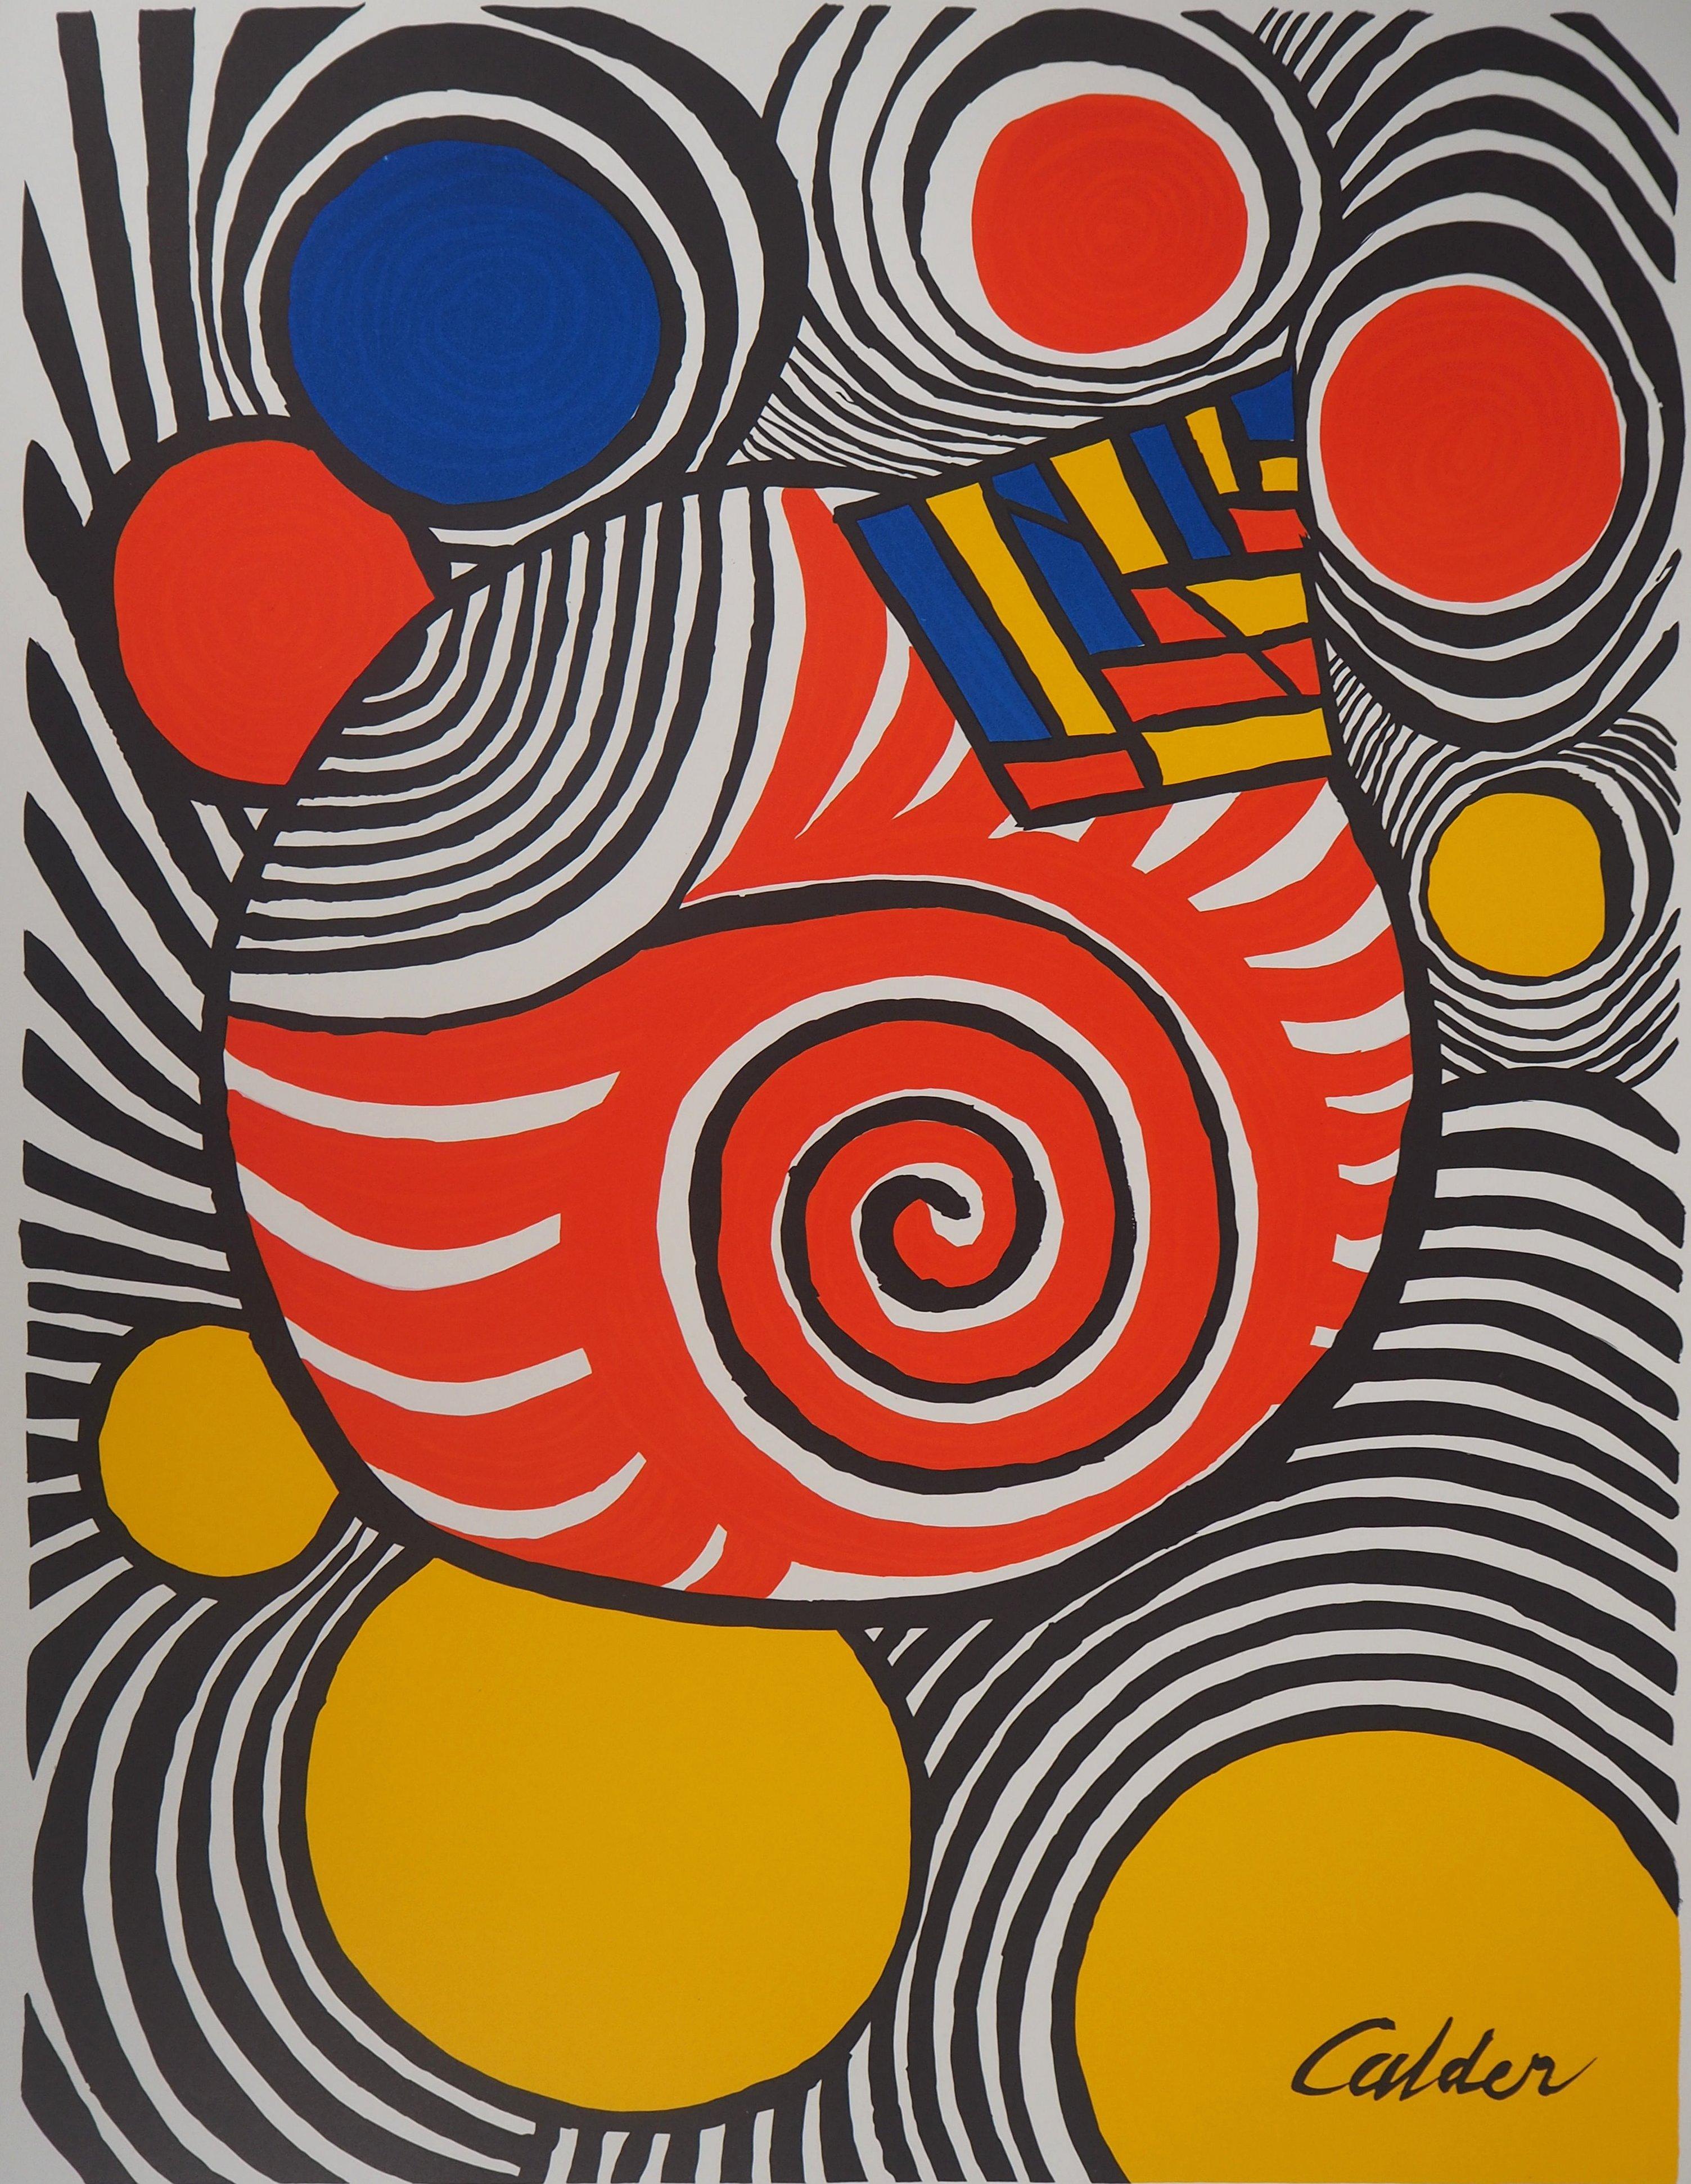 Alexander CALDER
Les Travestis du Reel, 1979

Original vintage lithograph poster
Printed in Atelier Arts-Litho
Printed signature in the plate
82 x  57 cm (c. 32.2 x 22.4 in)

Excellent condition